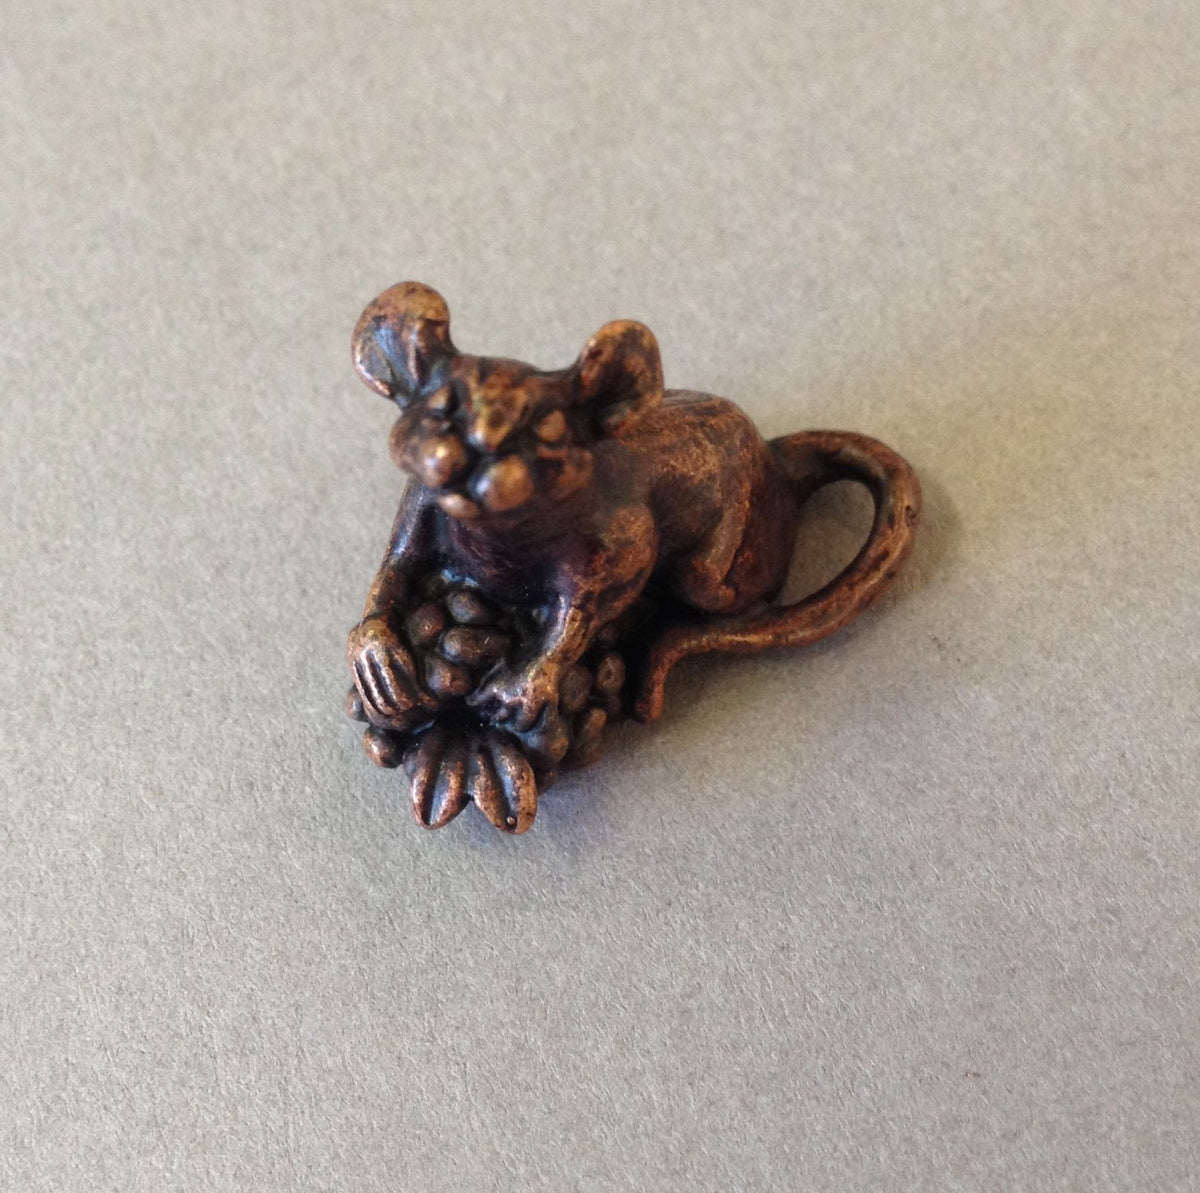 Miniature Mouse with Berry by David Meredith